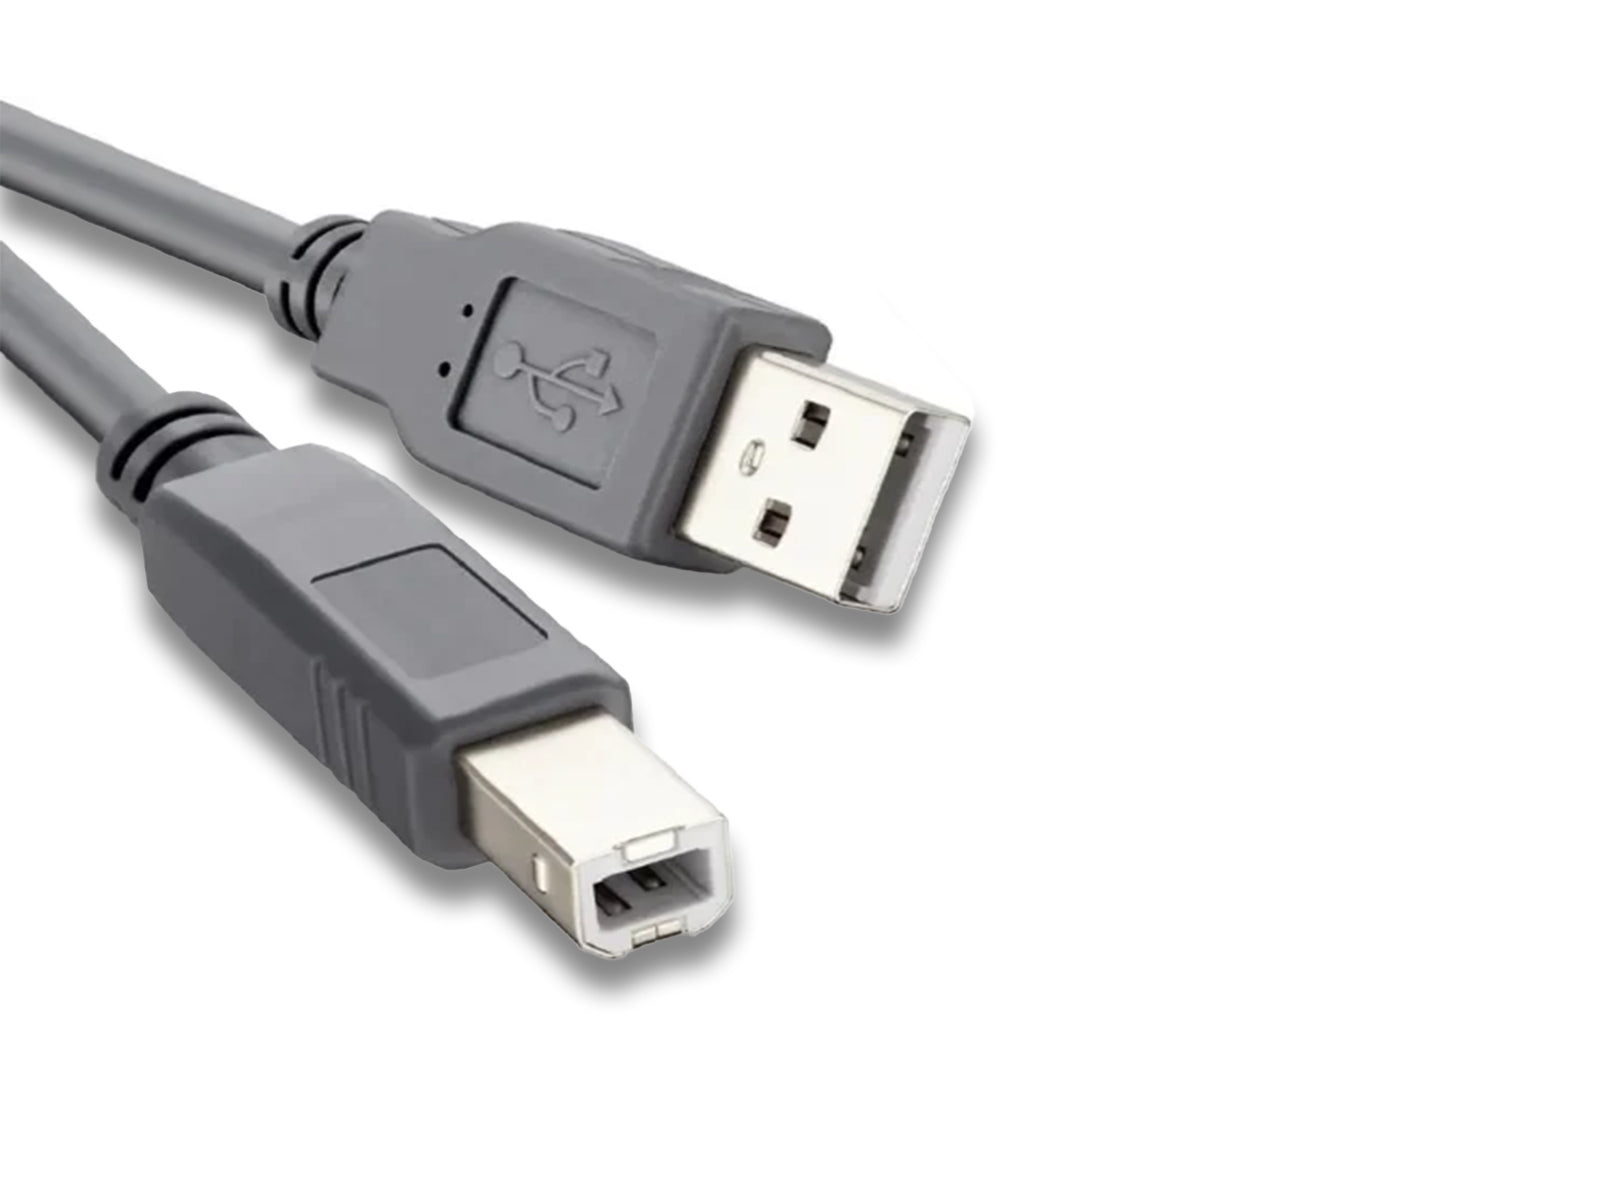 Printer Cable with USB Type A & Male USB Type B Close up